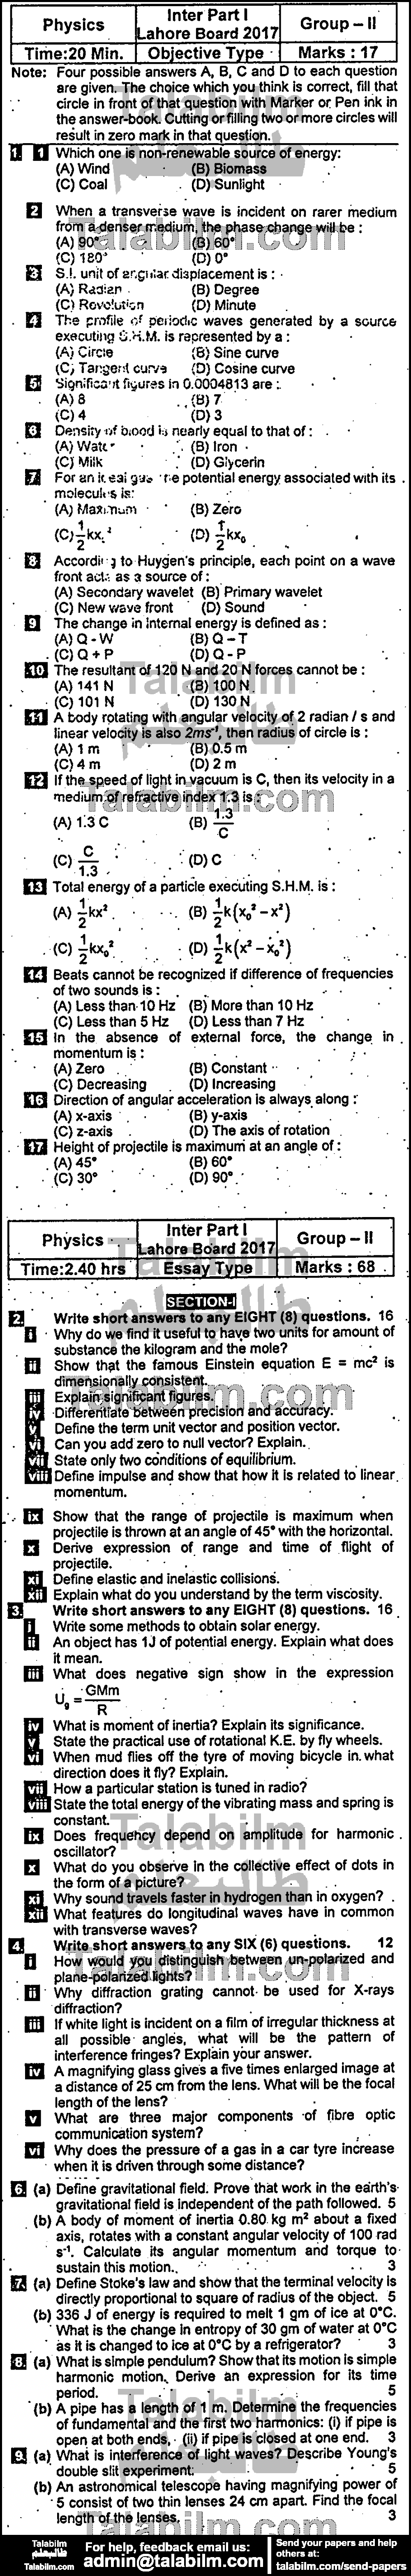 Physics 0 past paper for Group-II 2017